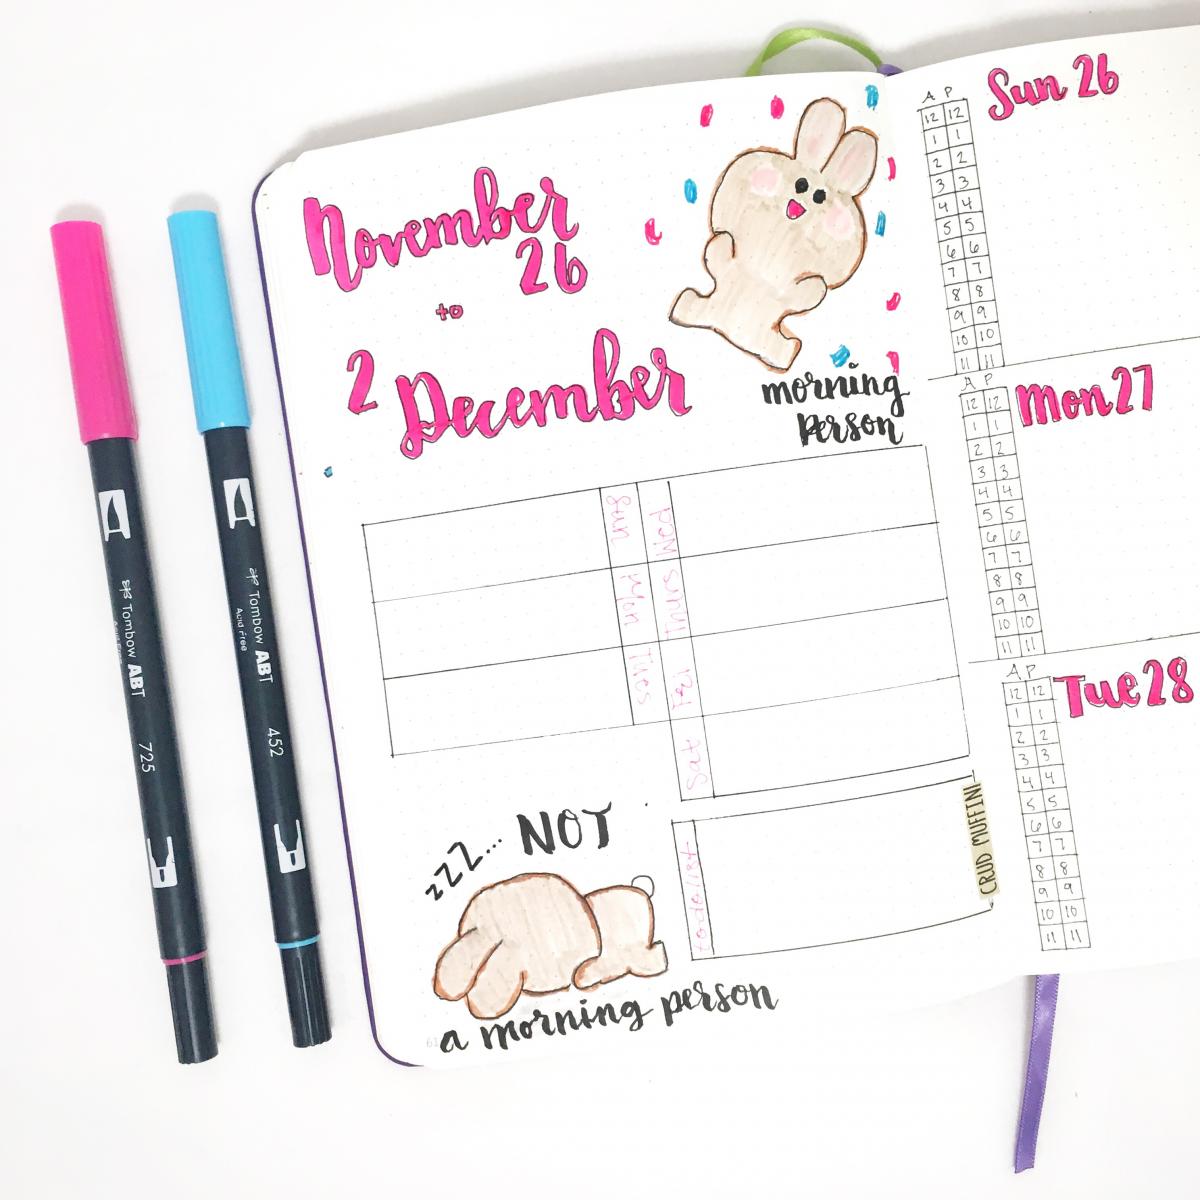 Bullet Journal Ideas and Inspiration - Planning Mindfully